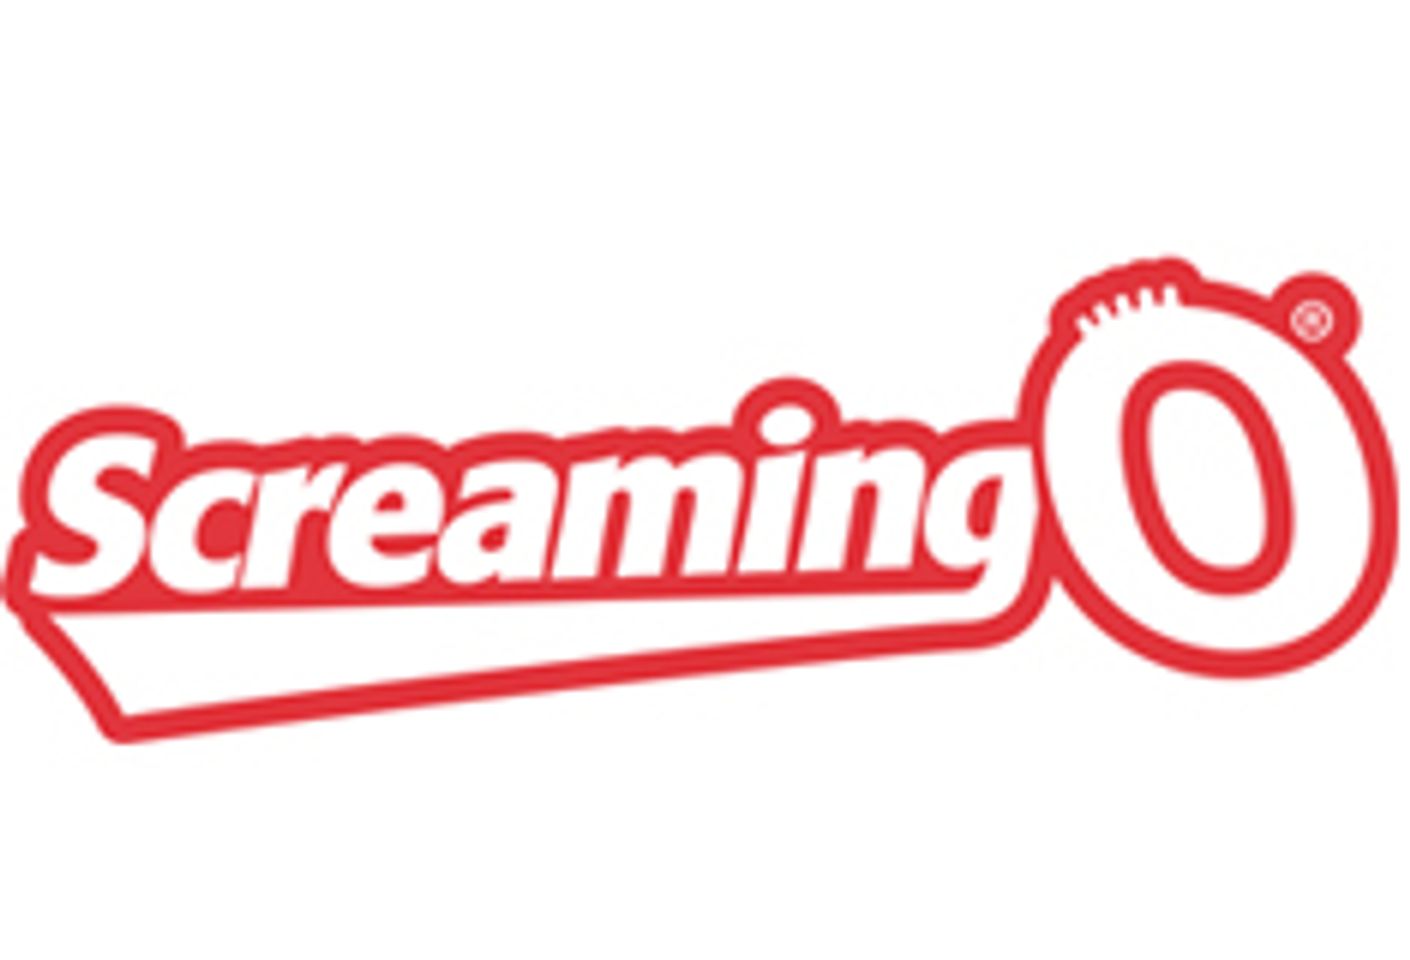 The Screaming O Showcasing New Releases at ANME